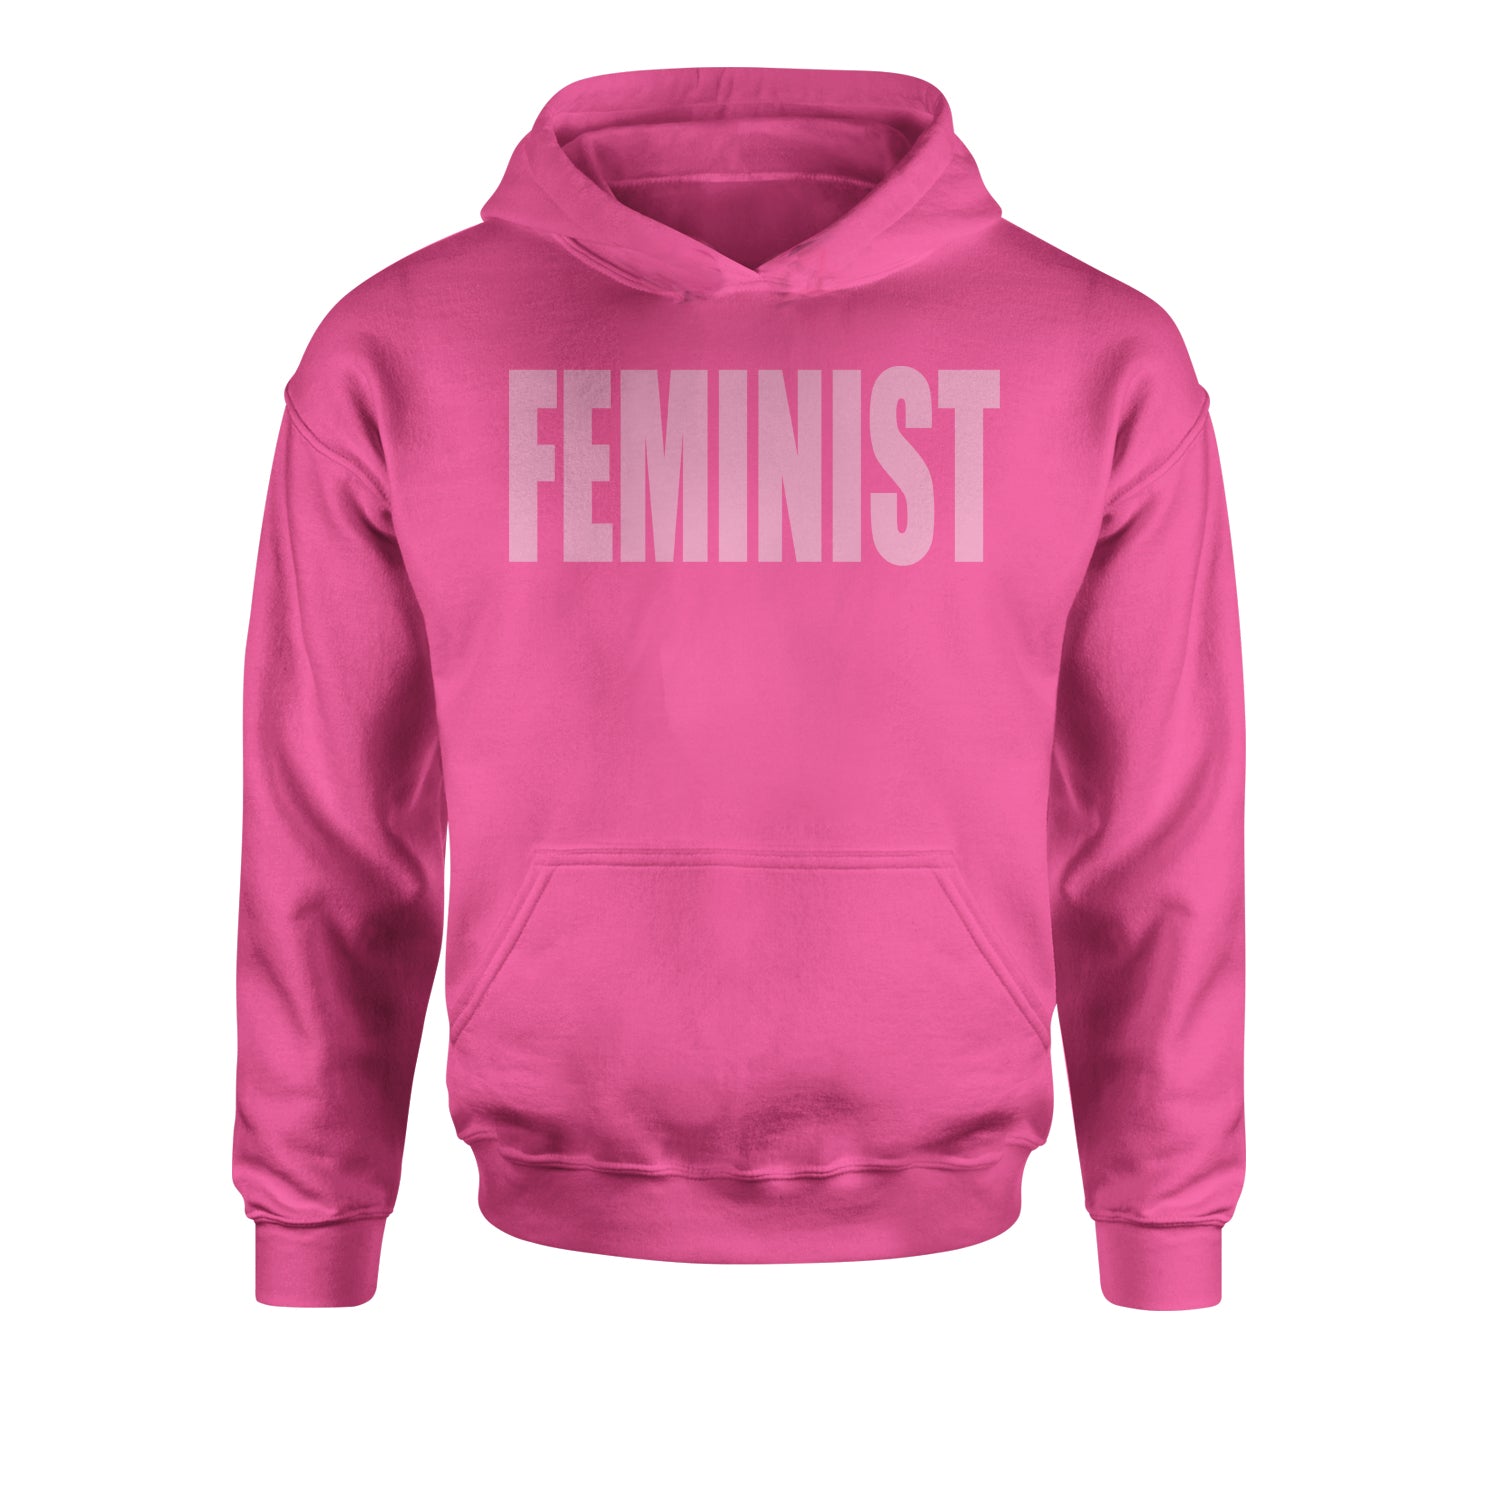 Feminist (Pink Print) Youth-Sized Hoodie a, equal, equality, feminism, feminist, gender, is, lgbtq, like, looks, nevertheless, pay, persisted, rights, she, this, what by Expression Tees